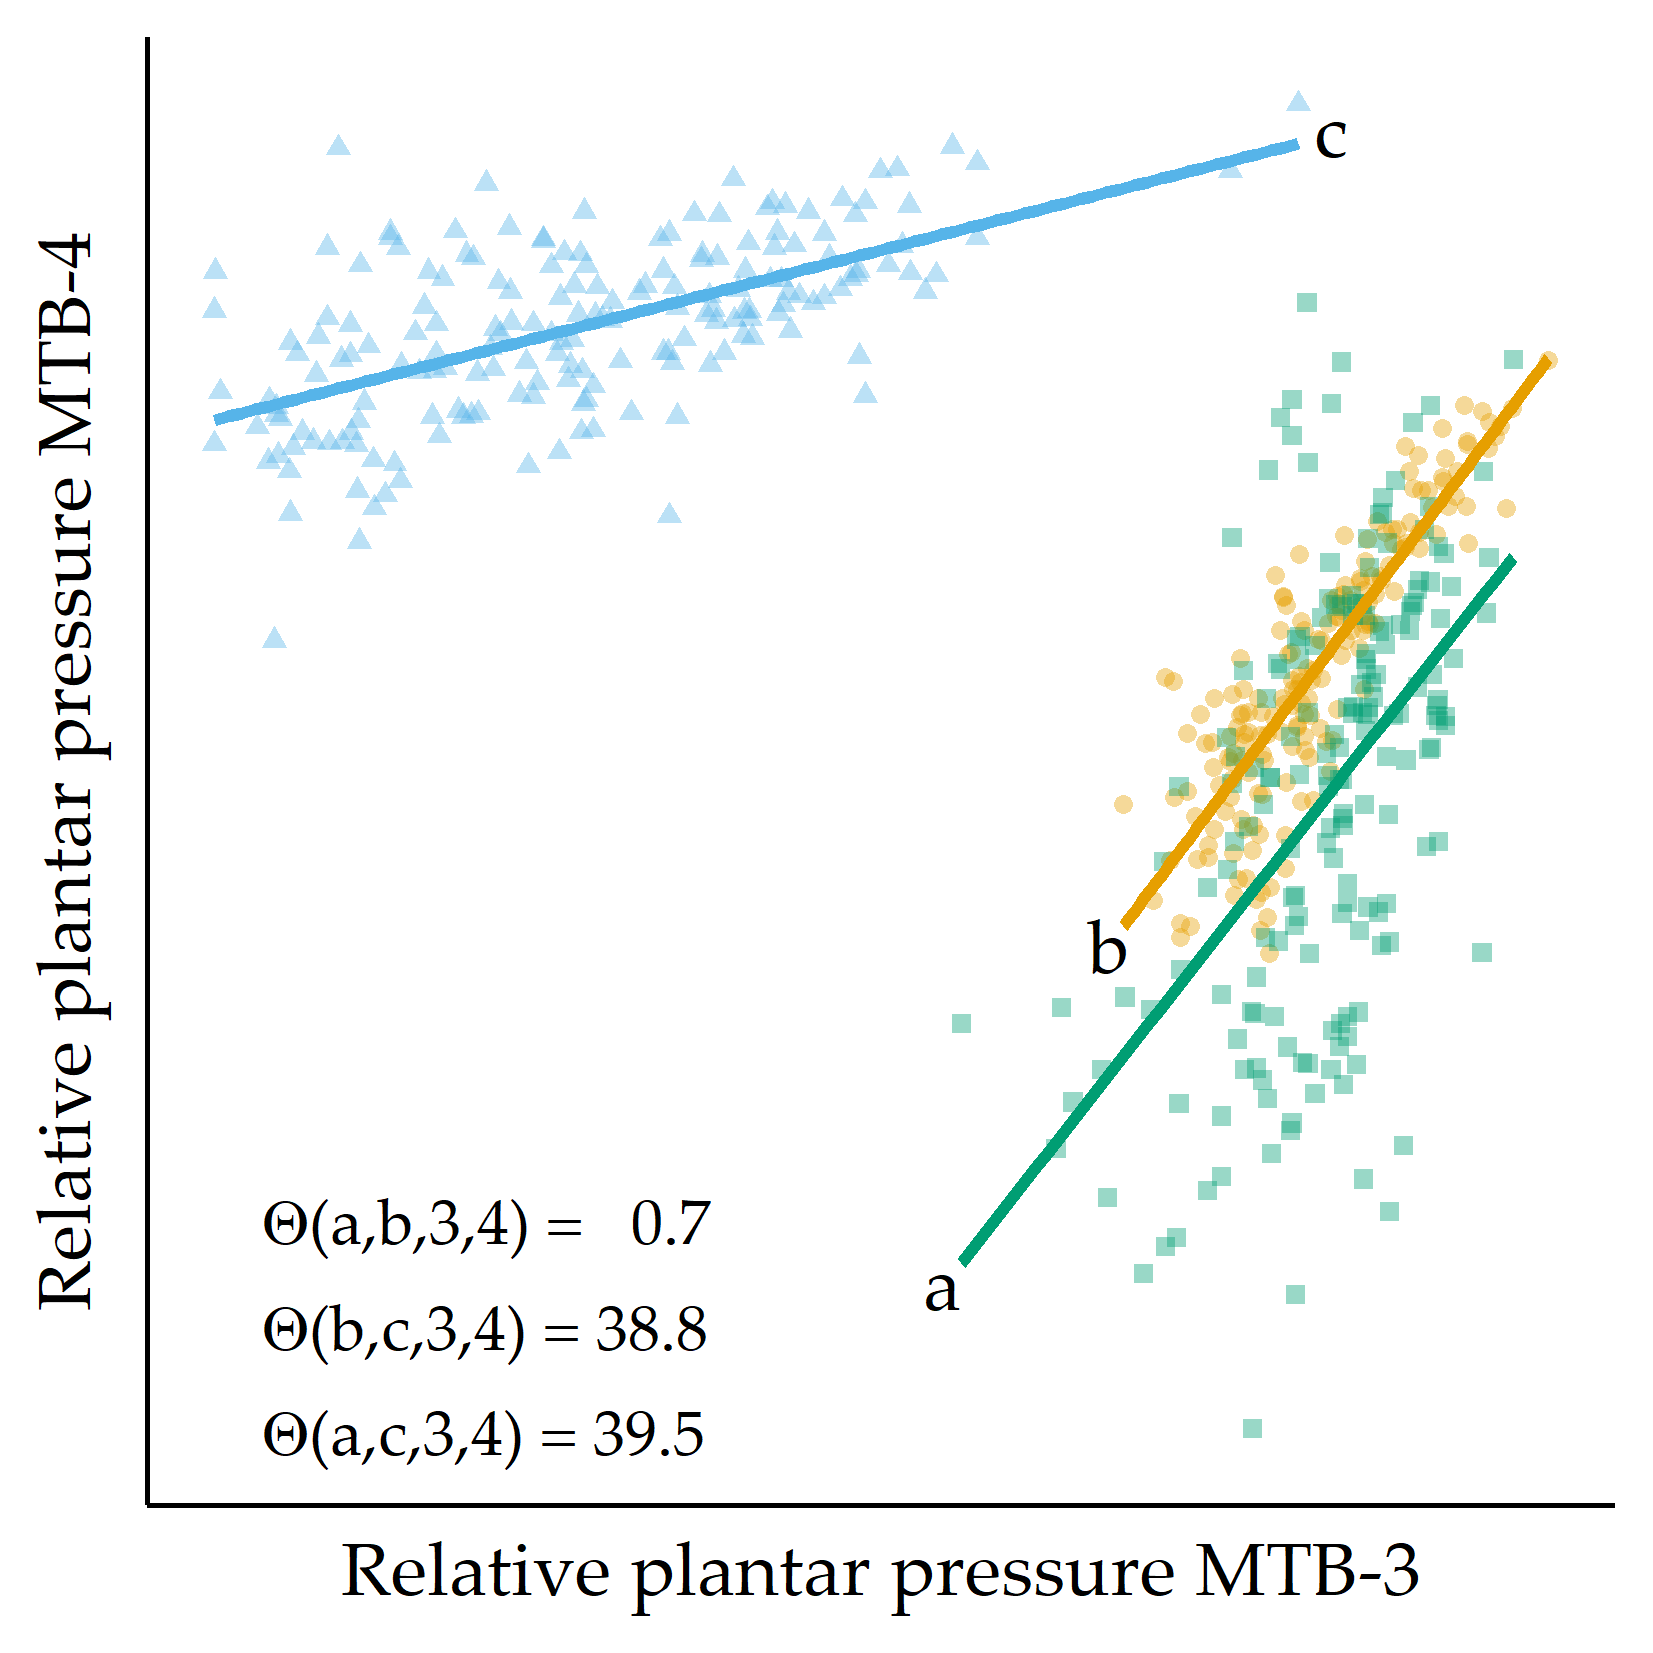 Example of three RPP distributions. For three example feet a, b, and c, RPP values for MTB-3 (x-axis) and MTB-4 (y-axis) are shown. Regression lines are fitted to each set of points. The angular distance values \(\Theta(\cdot)\) are small for the pairs of regression lines (a,b), while \(\Theta(a,c)\) and \(\Theta(b,c)\) are large, quantifying that the slope of the fit for c is different from the fit for a and b, respectively. MTB: metatarsal bone.